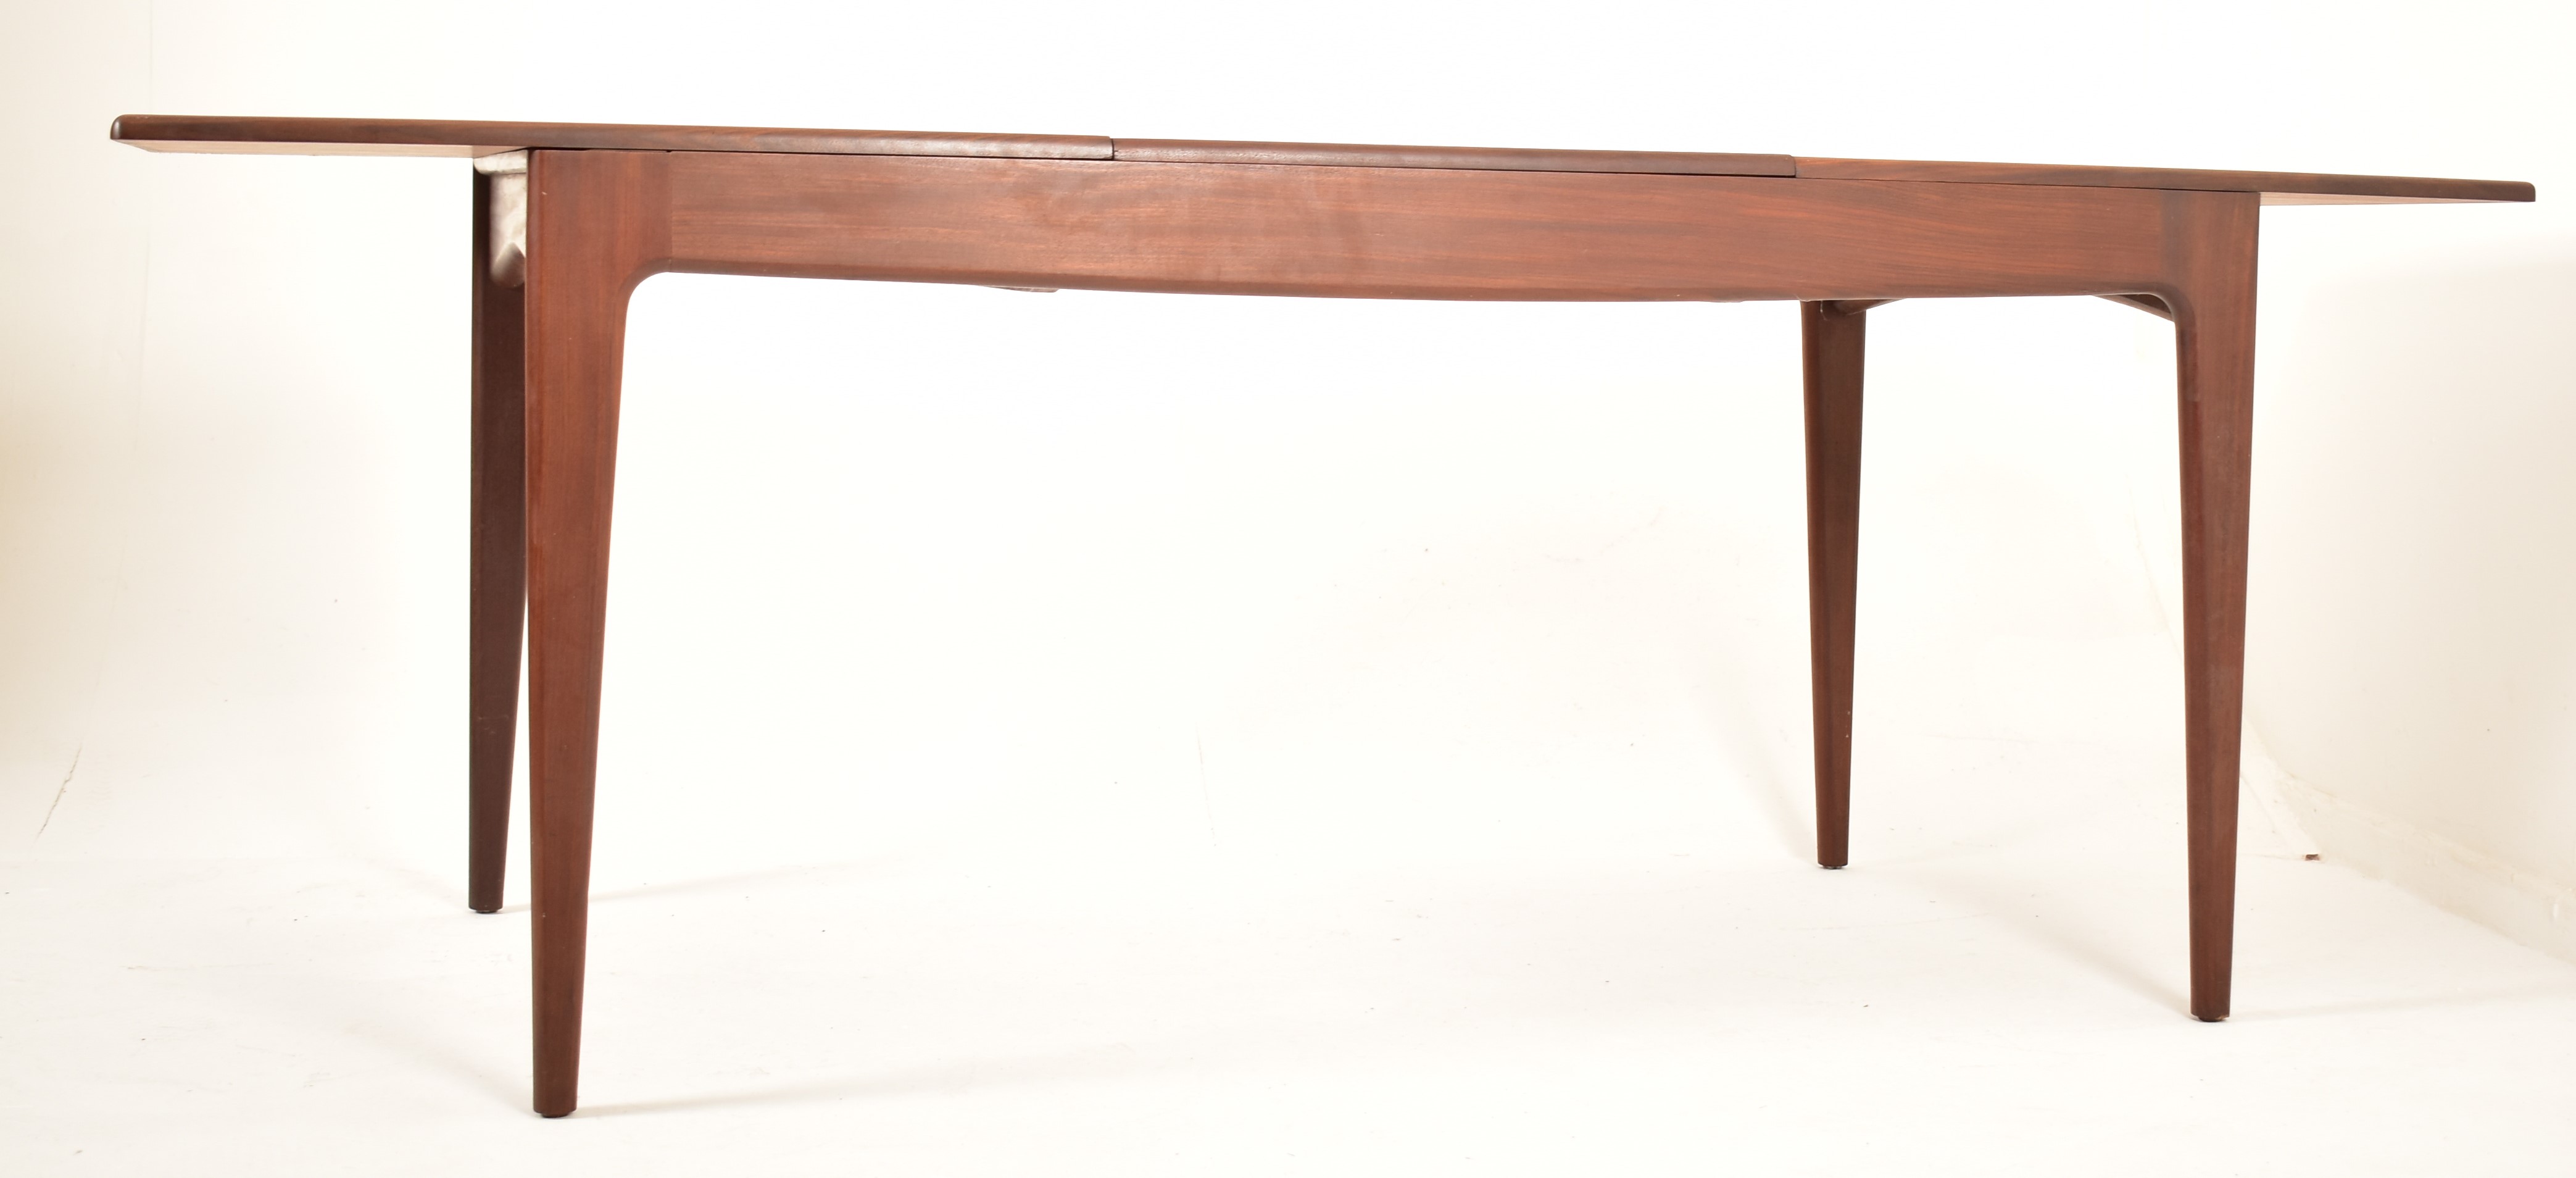 YOUNGERS - MID CENTURY 1960S TEAK DINING TABLE AND CHAIRS - Image 4 of 9